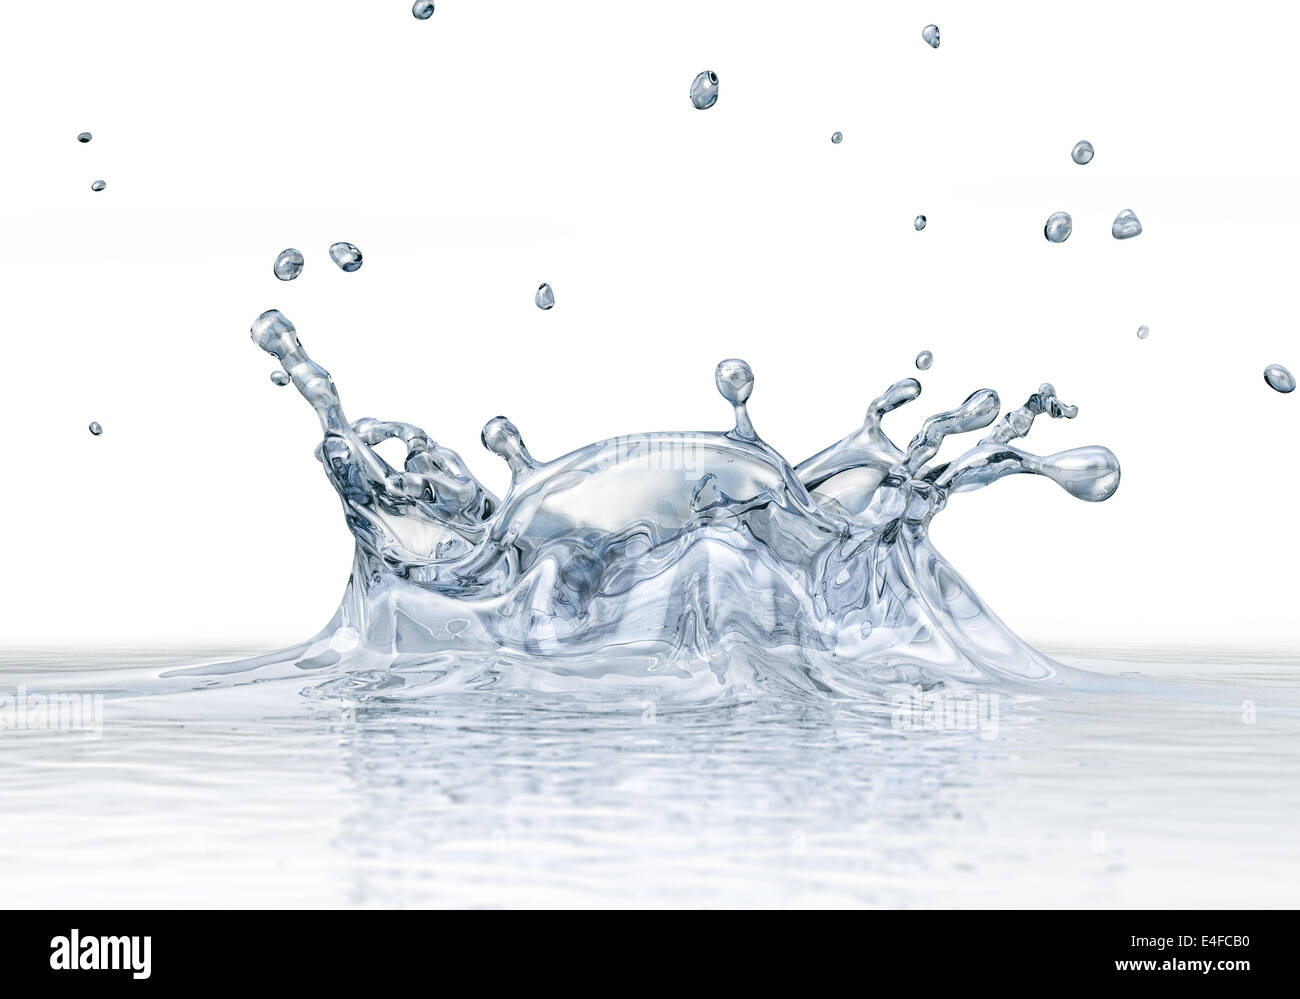 Water crown splash viewed from a side. On white background. Clipping path included. Stock Photo